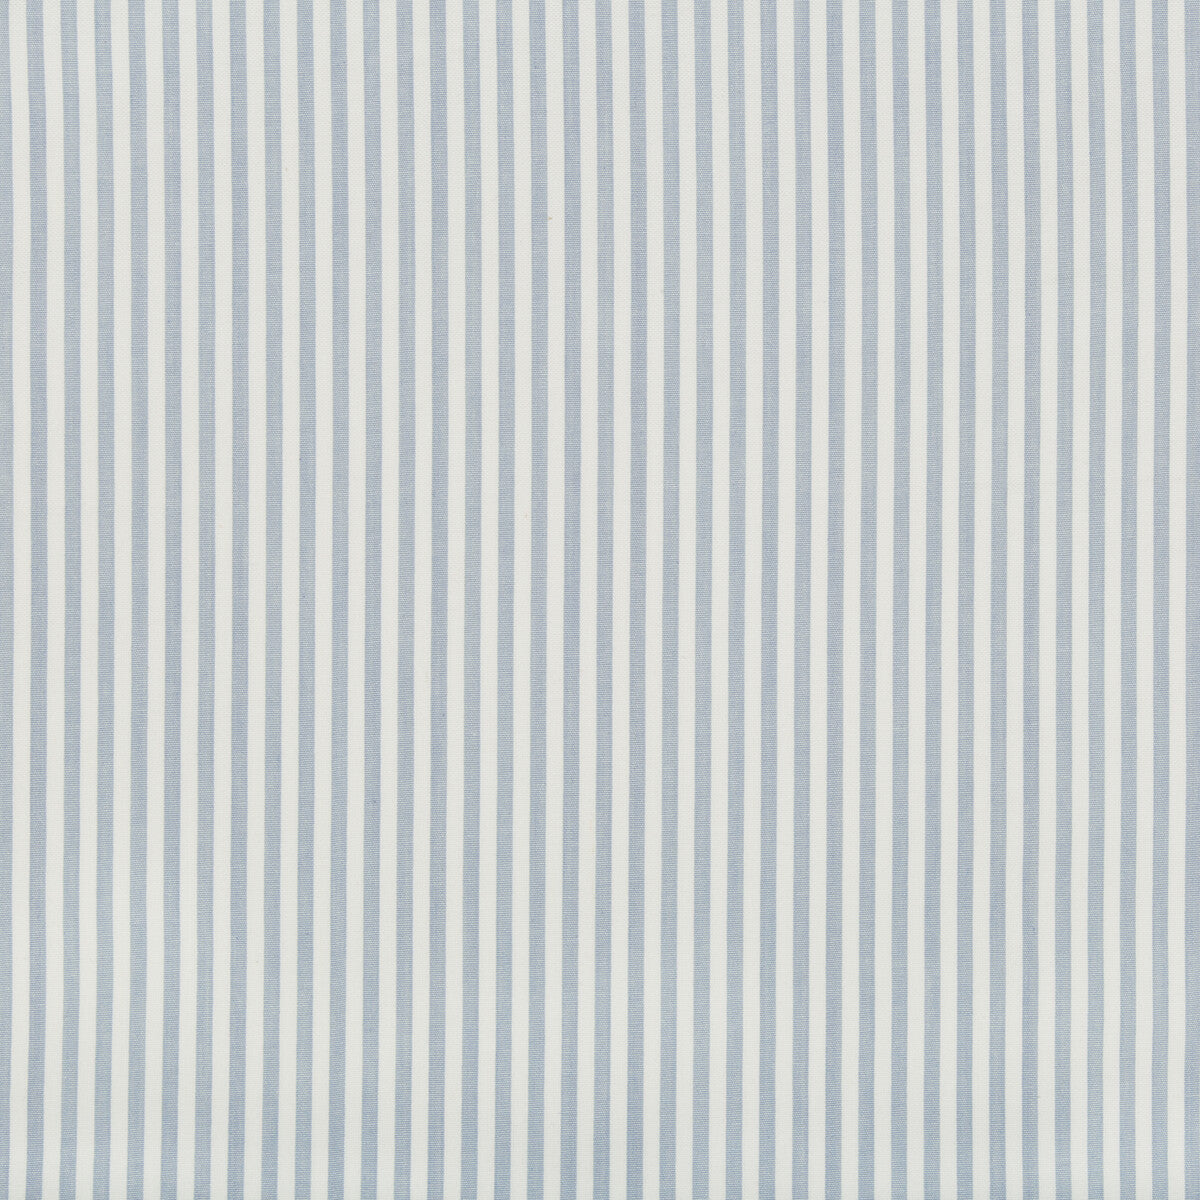 Cap Ferrat Stripe fabric in sky color - pattern 2018146.115.0 - by Lee Jofa in the Suzanne Kasler The Riviera collection